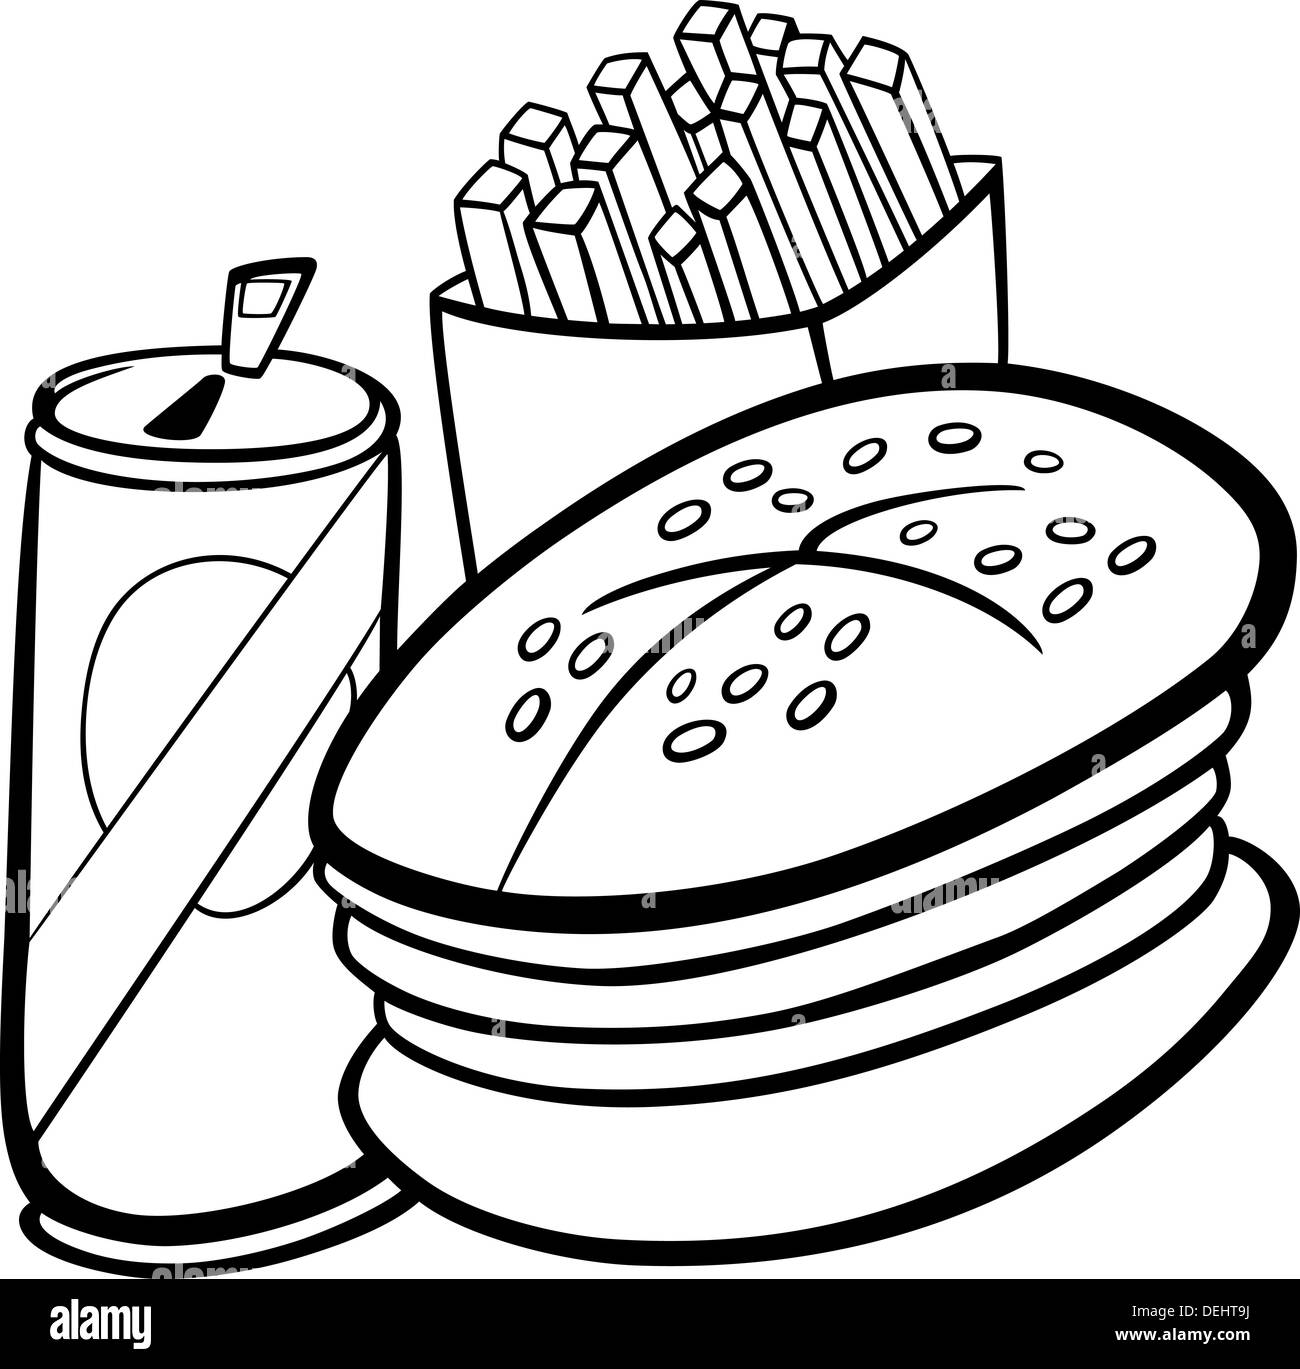 Featured image of post Cute Fries Clipart Black And White Download high quality black white clip art from our collection of 41 940 205 clip art graphics